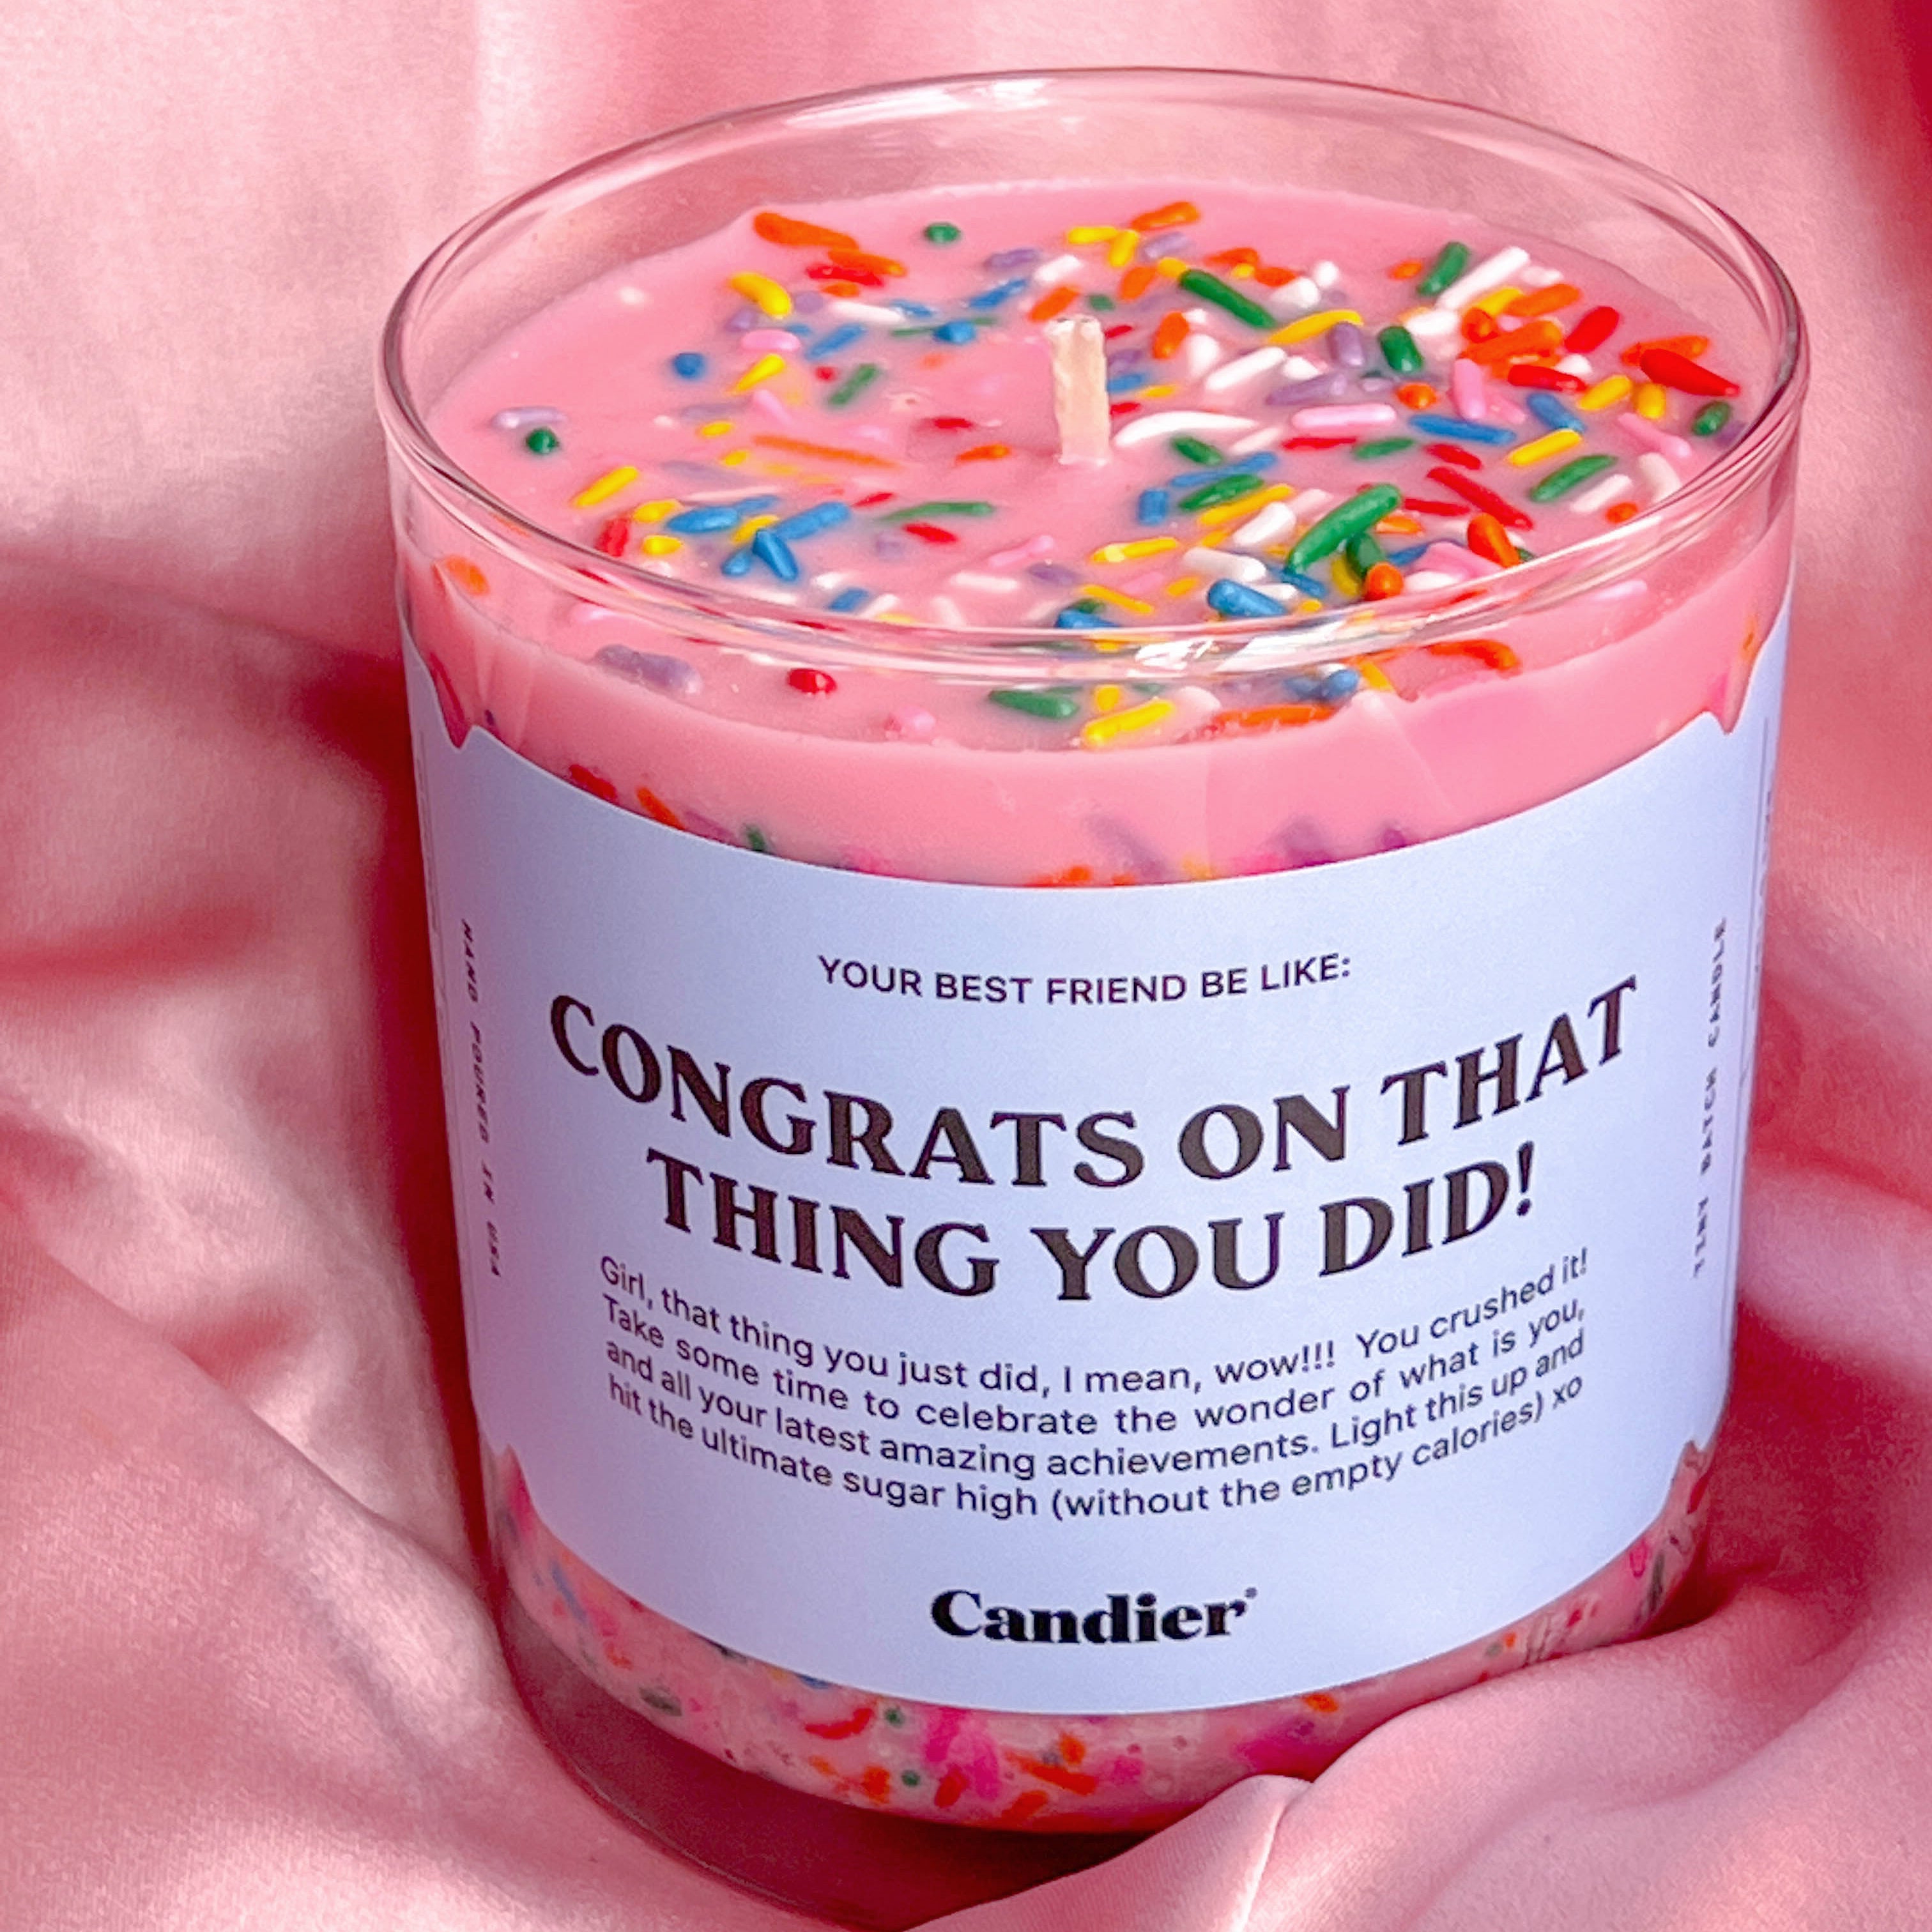 Top view of the "Congrats on that thing you did!" pink Candle by Candier with sprinkles displayed in silk